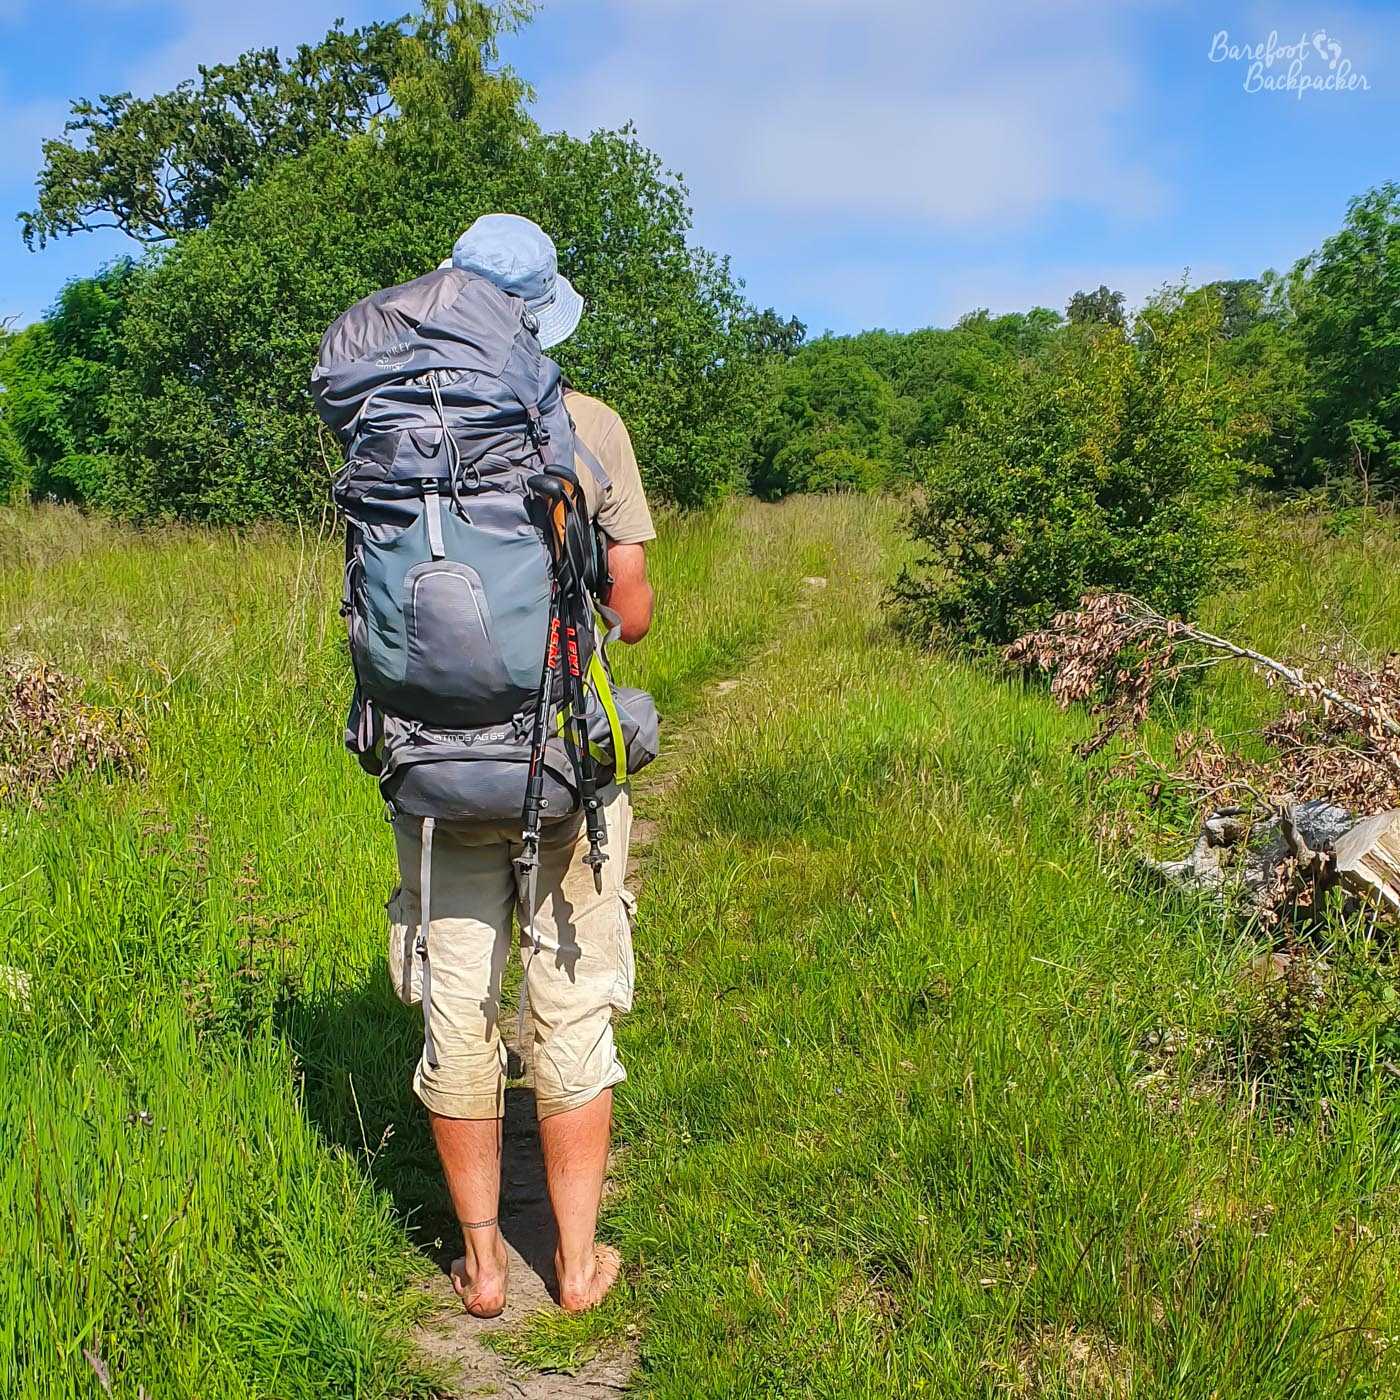 The Barefoot Backpacker, pictured true to their name, on the St Cuthbert's Way footpath in Scotland. They are stood on the vague path in a field grass, barefoot, carrying a backpack, ready to start hiking onwards away from the camera. It's a bright sunny day and the path disappears into what are very vibrant bushes.